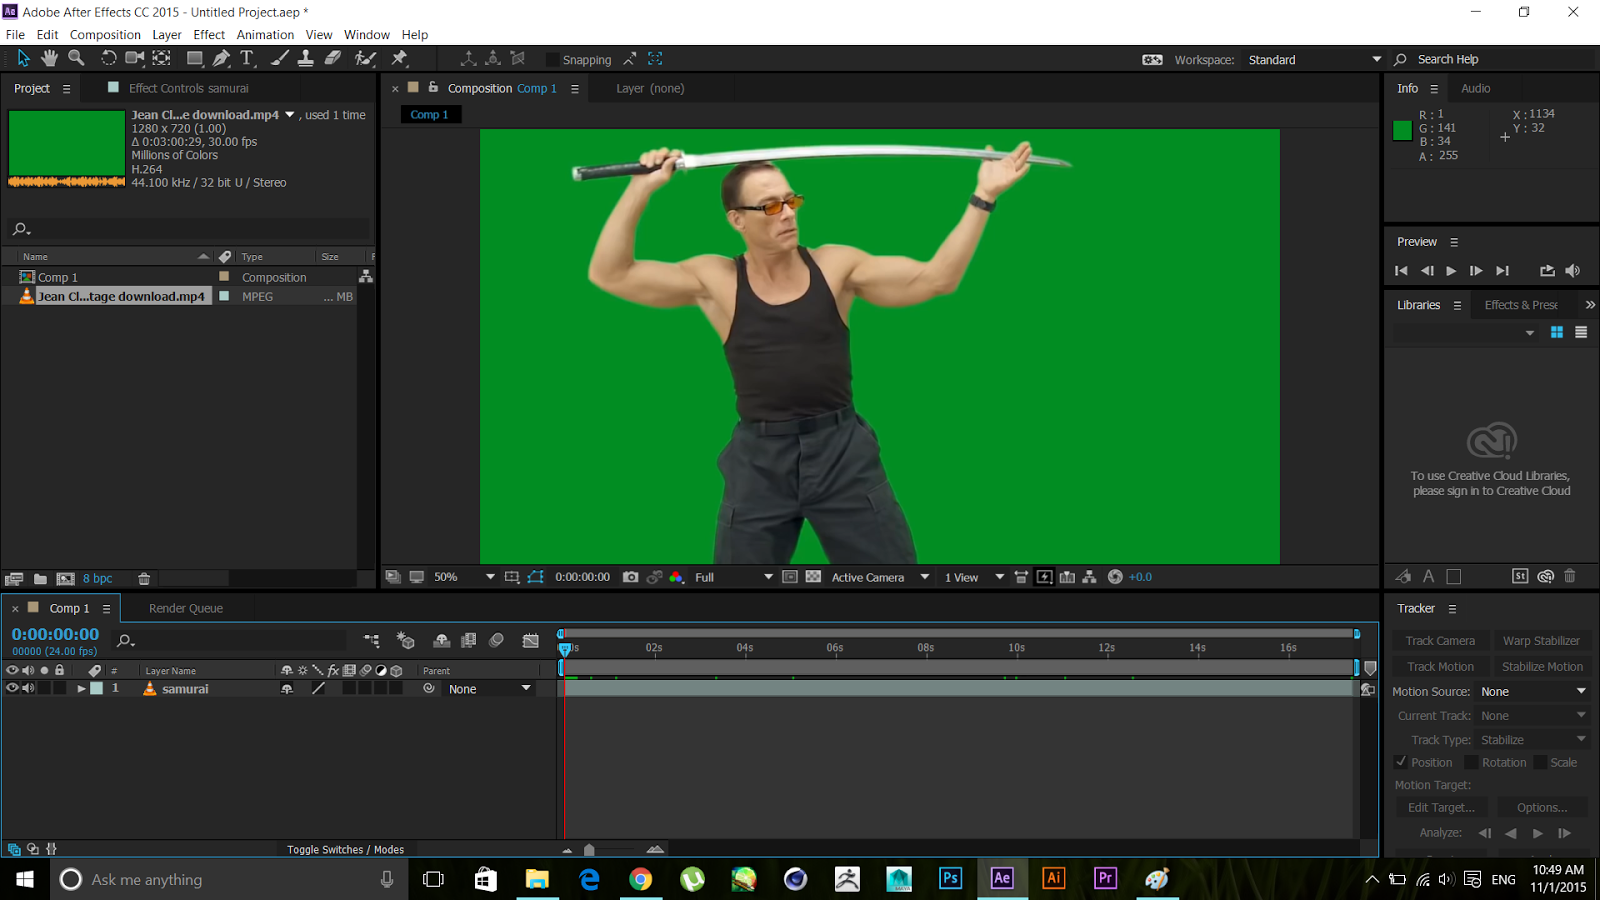 After effect ключи. Adobe after Effects. Adobe after Effects cs6. After Effects 2015. Adobe after Effects 2021.